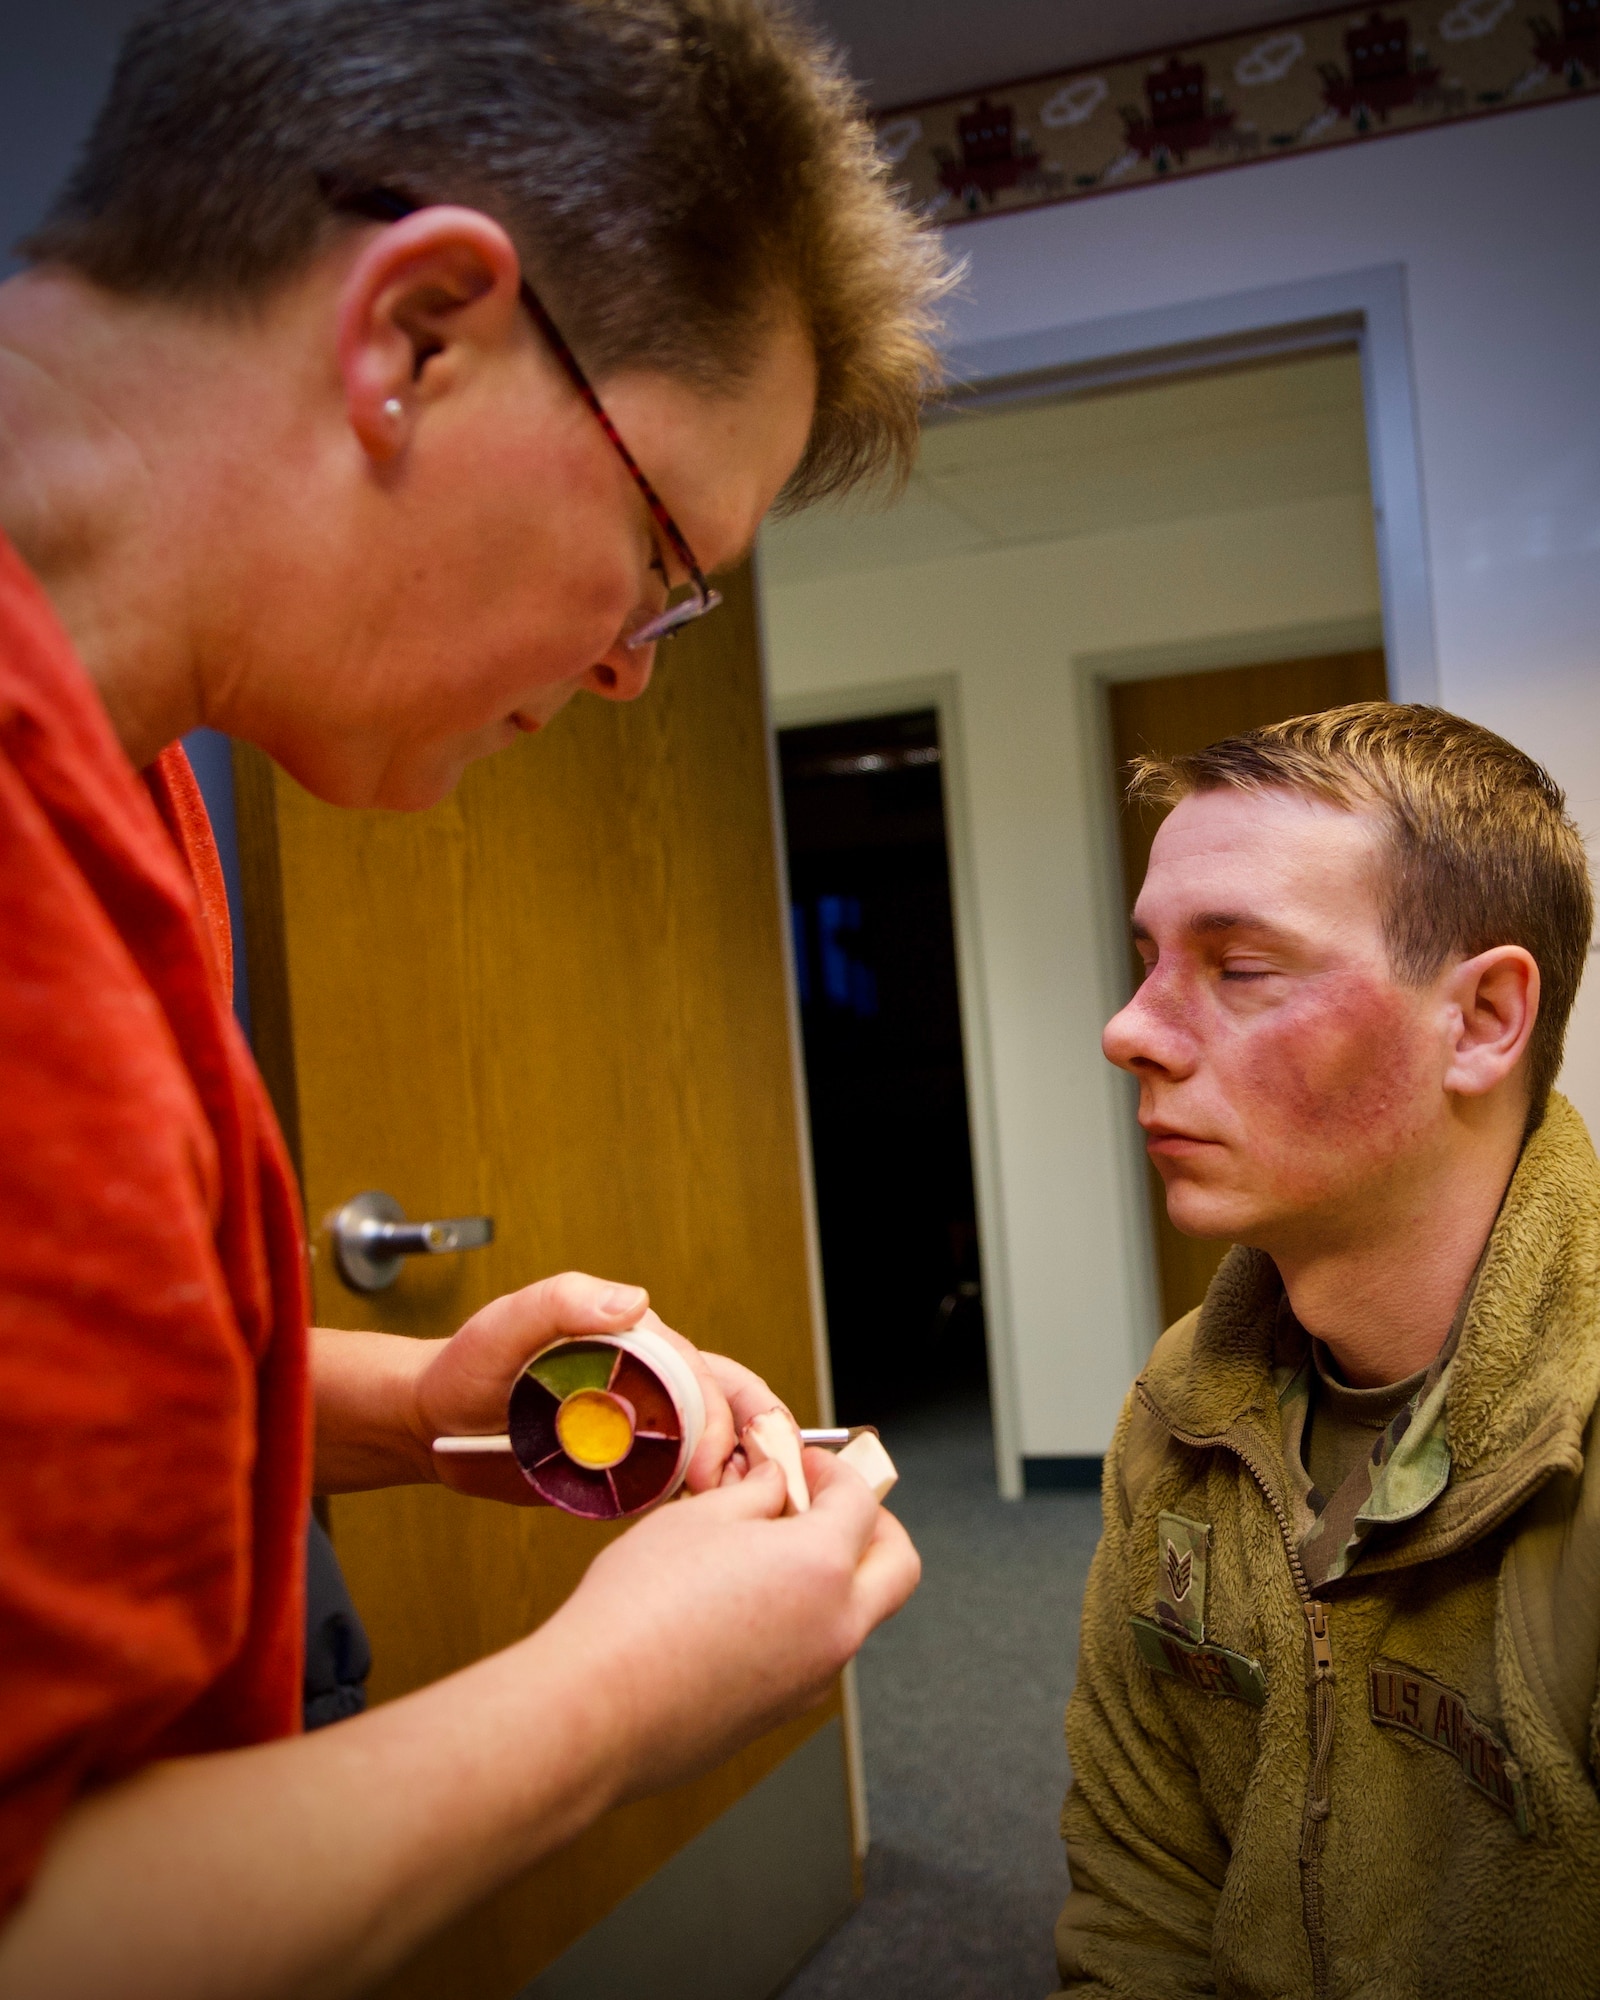 Staff Sgt. Adam Waters has makeup applied to his face during the Black Eye Campaign, Feb. 25. Waters wore the makeup all day in his work area to simulate intimate partner violence. (U.S. Air Force photo by Jennifer Spradlin)